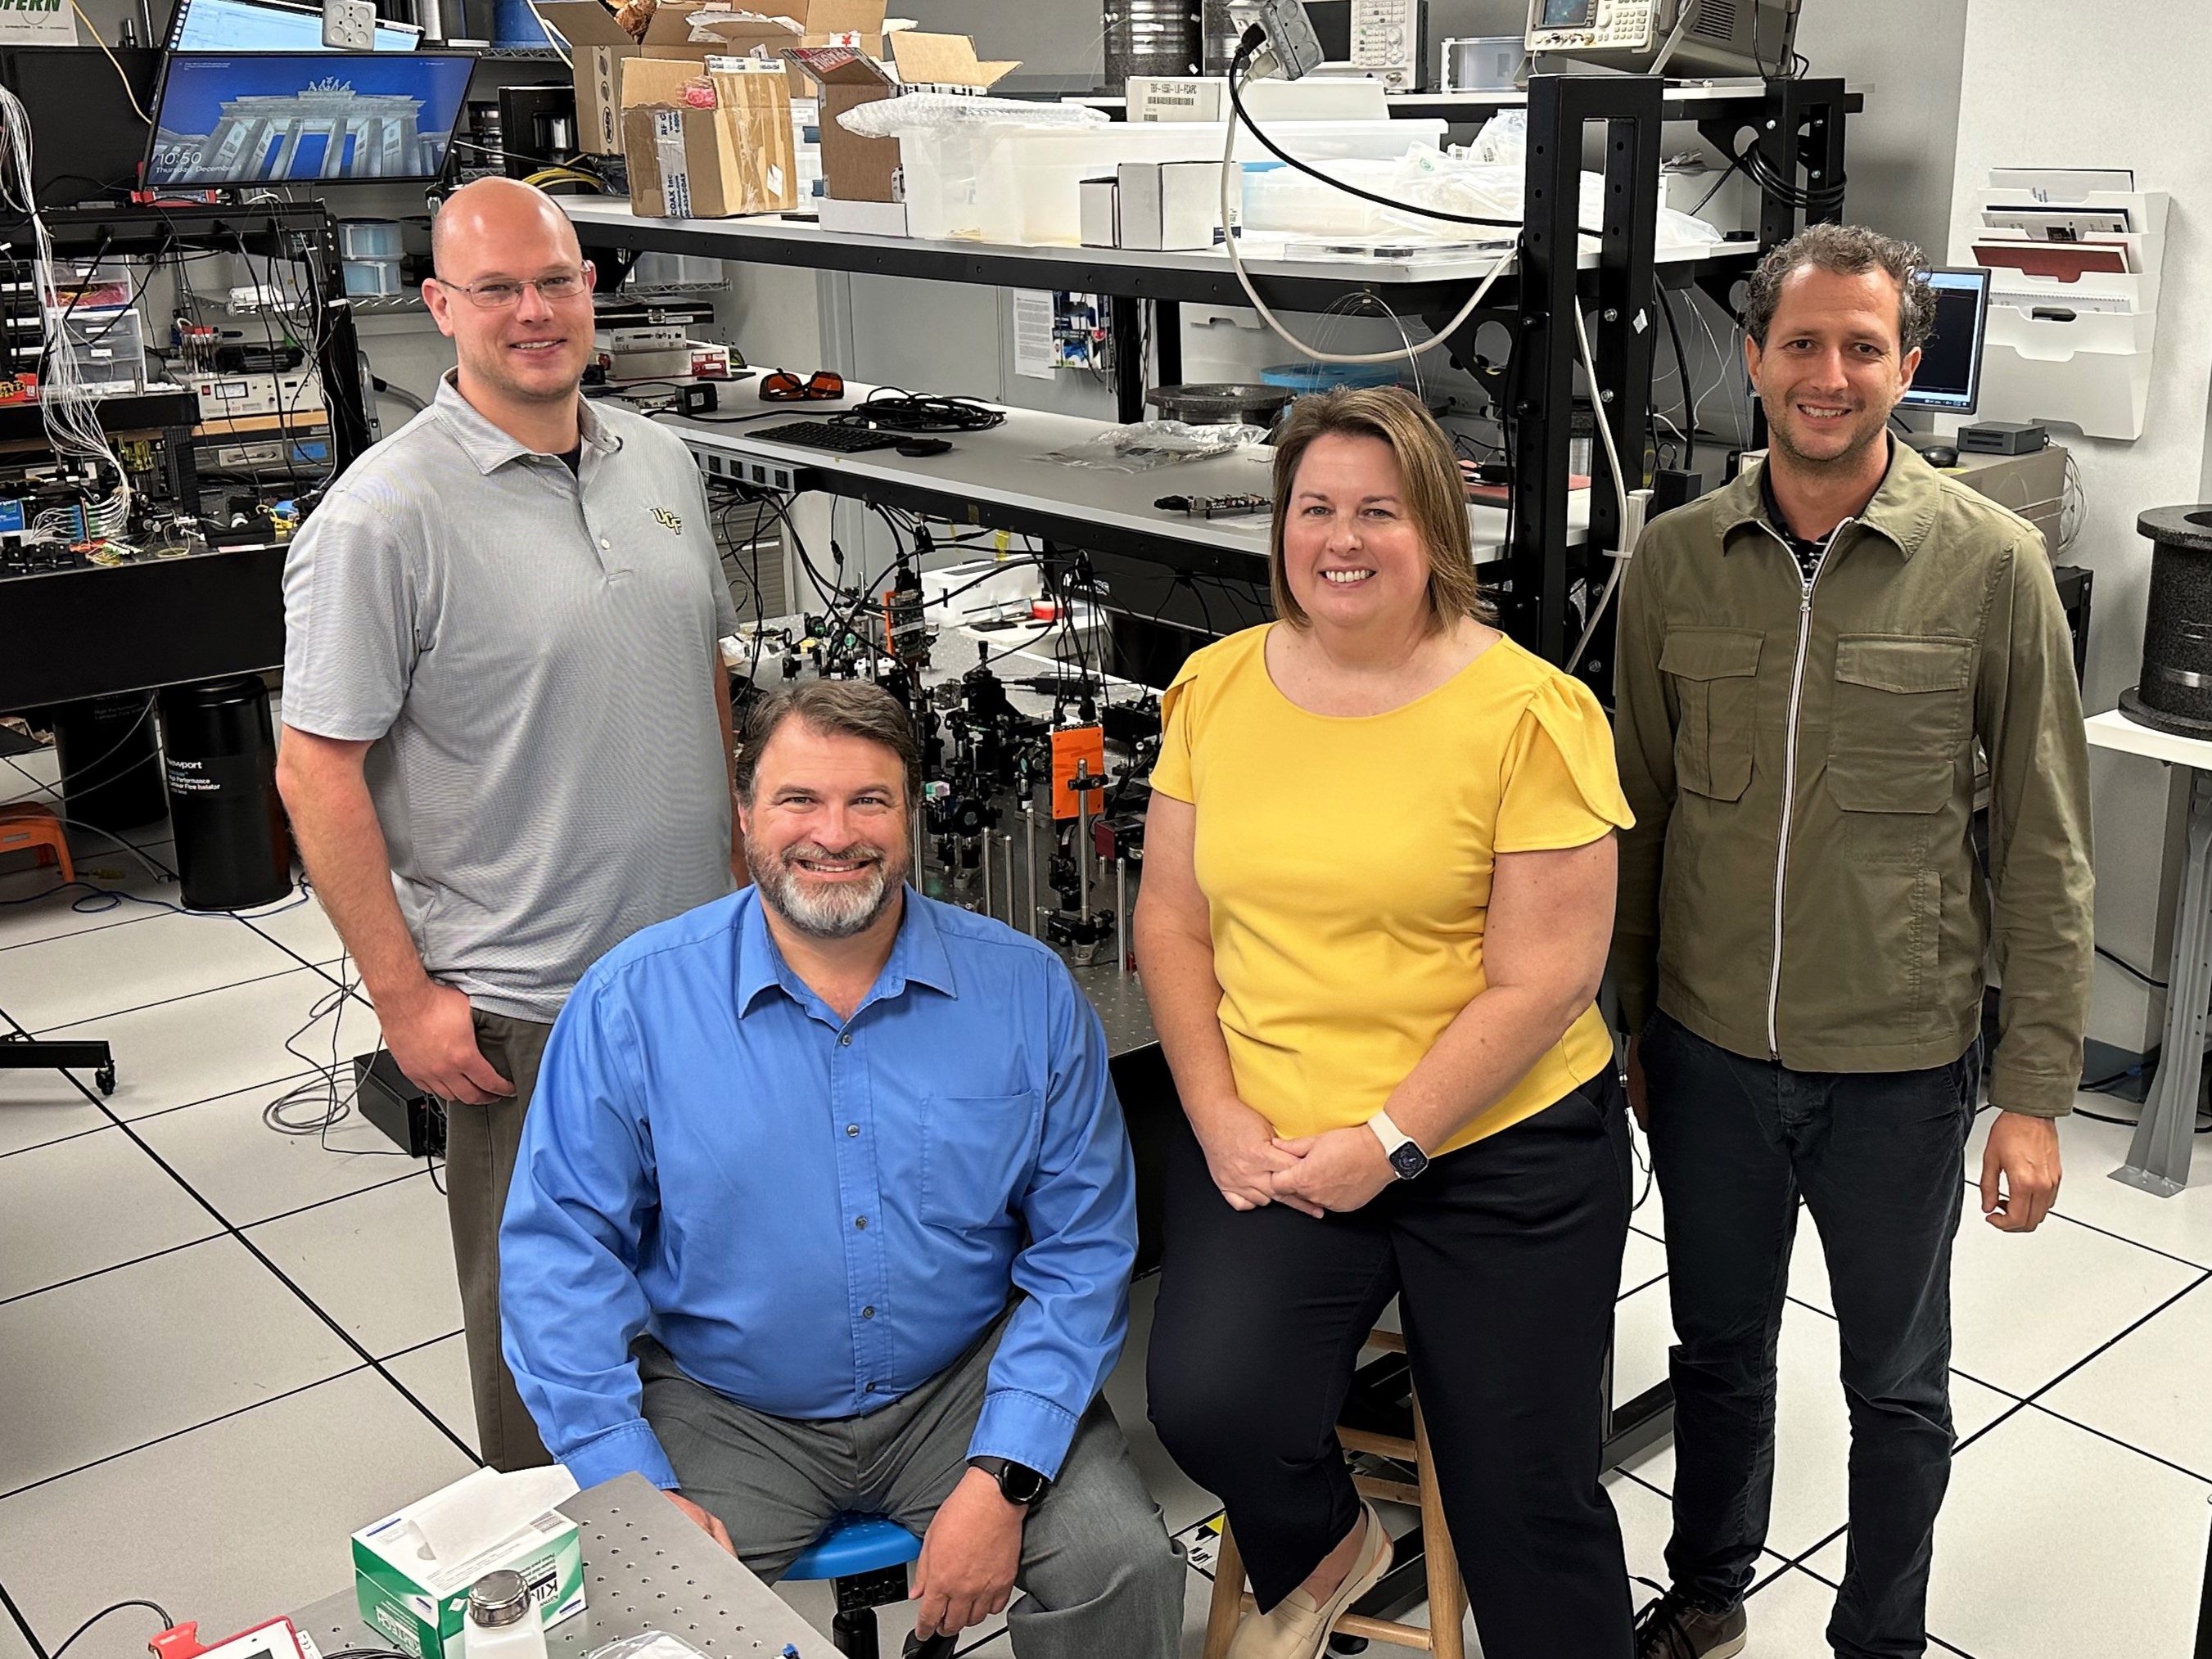 The UCF team is led by CREOL professors of optics and photonics, Stephen Eikenberry and Rodrigo Amezcua-Correa, supported by CREOL Ph.D. candidate
and U.S. Space Force Major, Matthew Cooper, and Kerri Donaldson-Hanna, assistant professor of physics and a member of UCF’s Planetary Sciences Group.